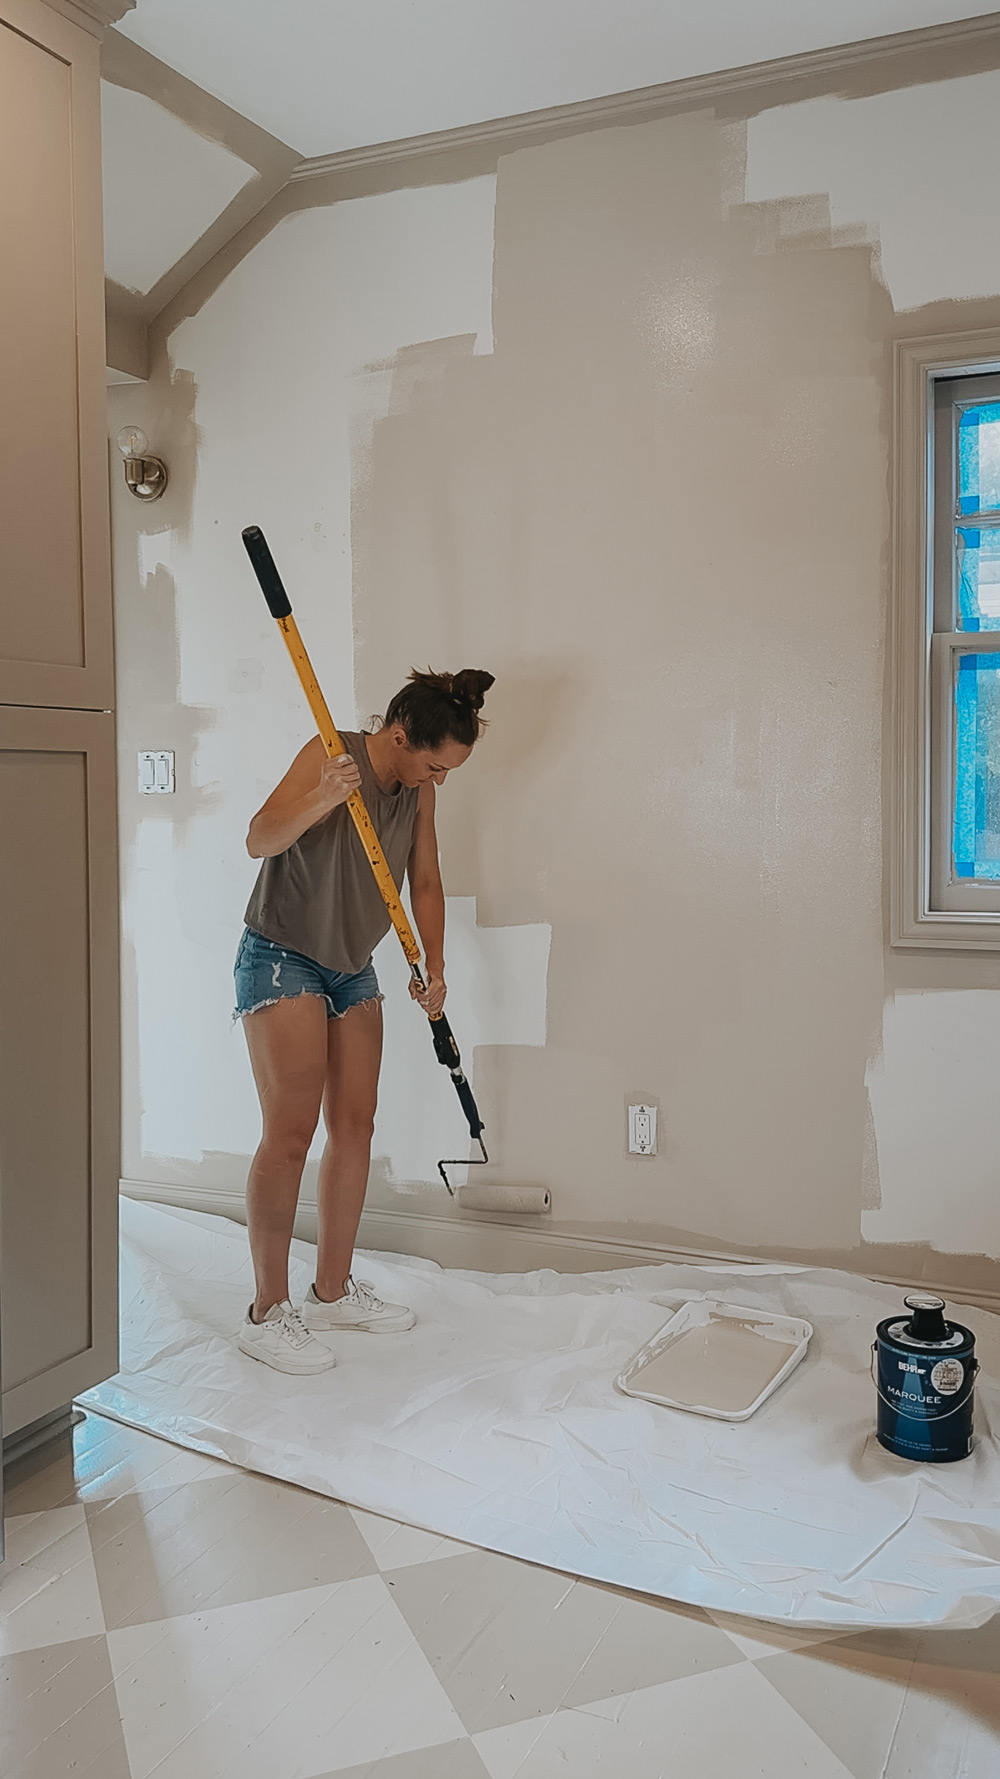 A person using a roller brush to paint a wall.